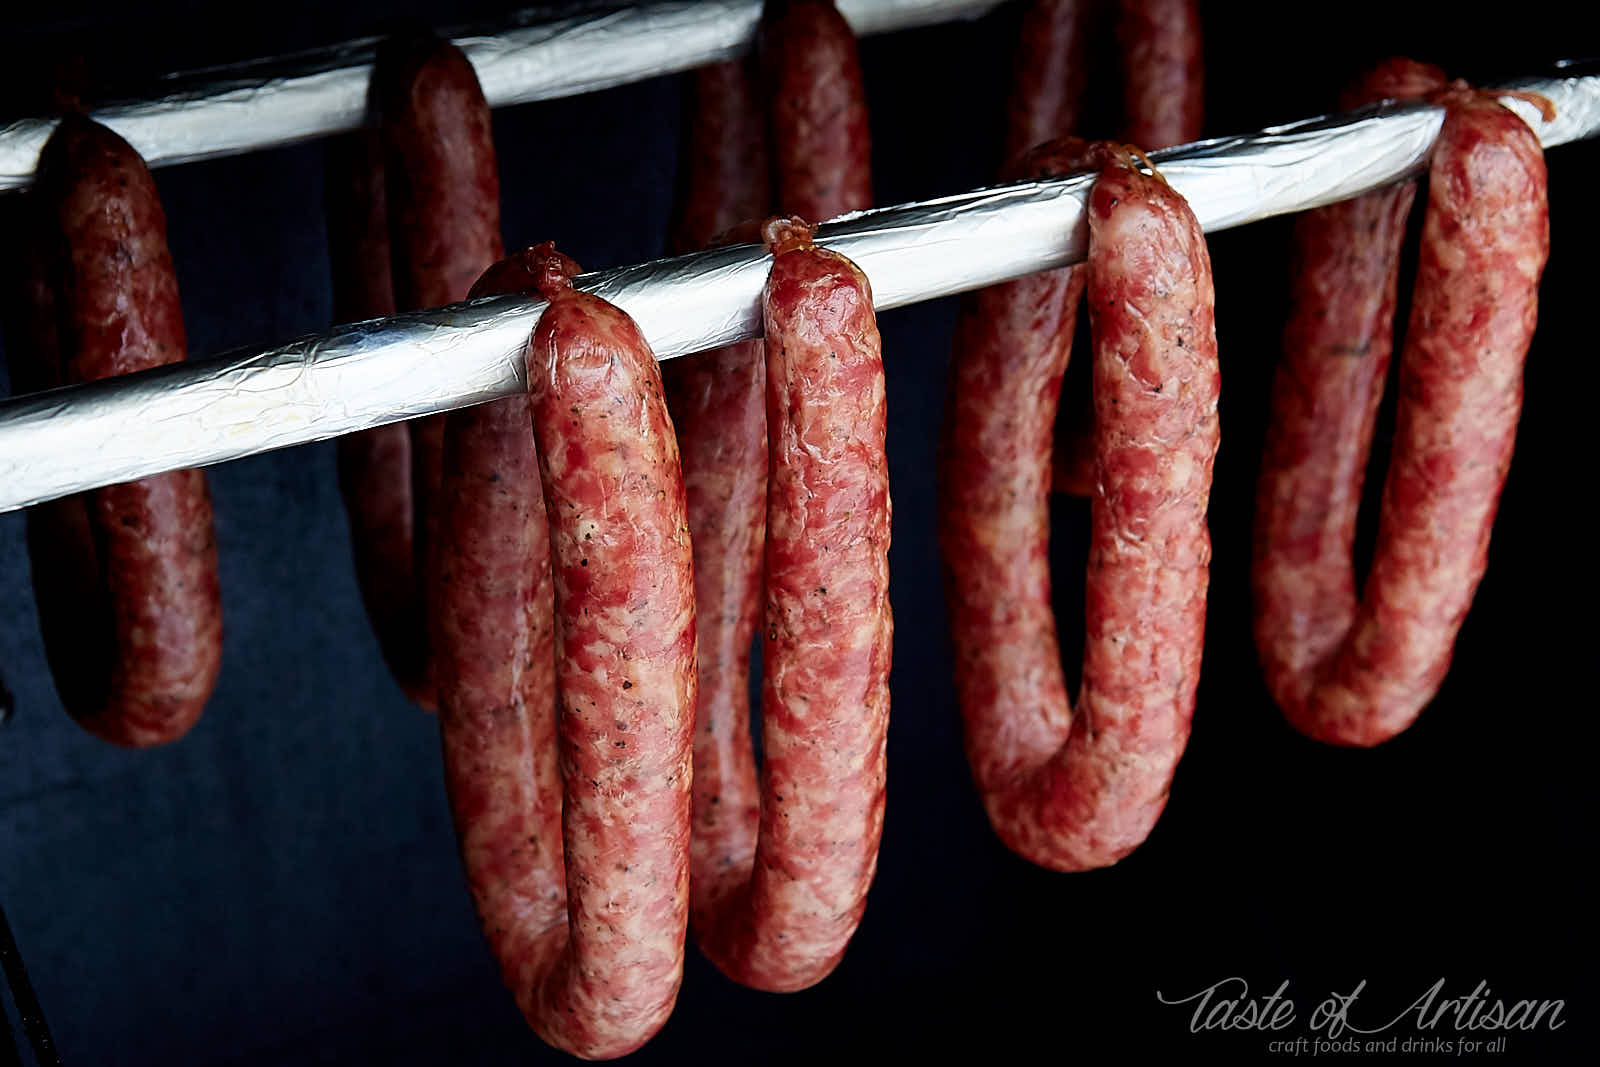 Learn how to make authentic Polish kielbasa (sausage) at home. The name of this kielbasa is Swojska, which means homemade or self-made. It's one of the best and most flavorful Polish sausages.| Taste of Artisan